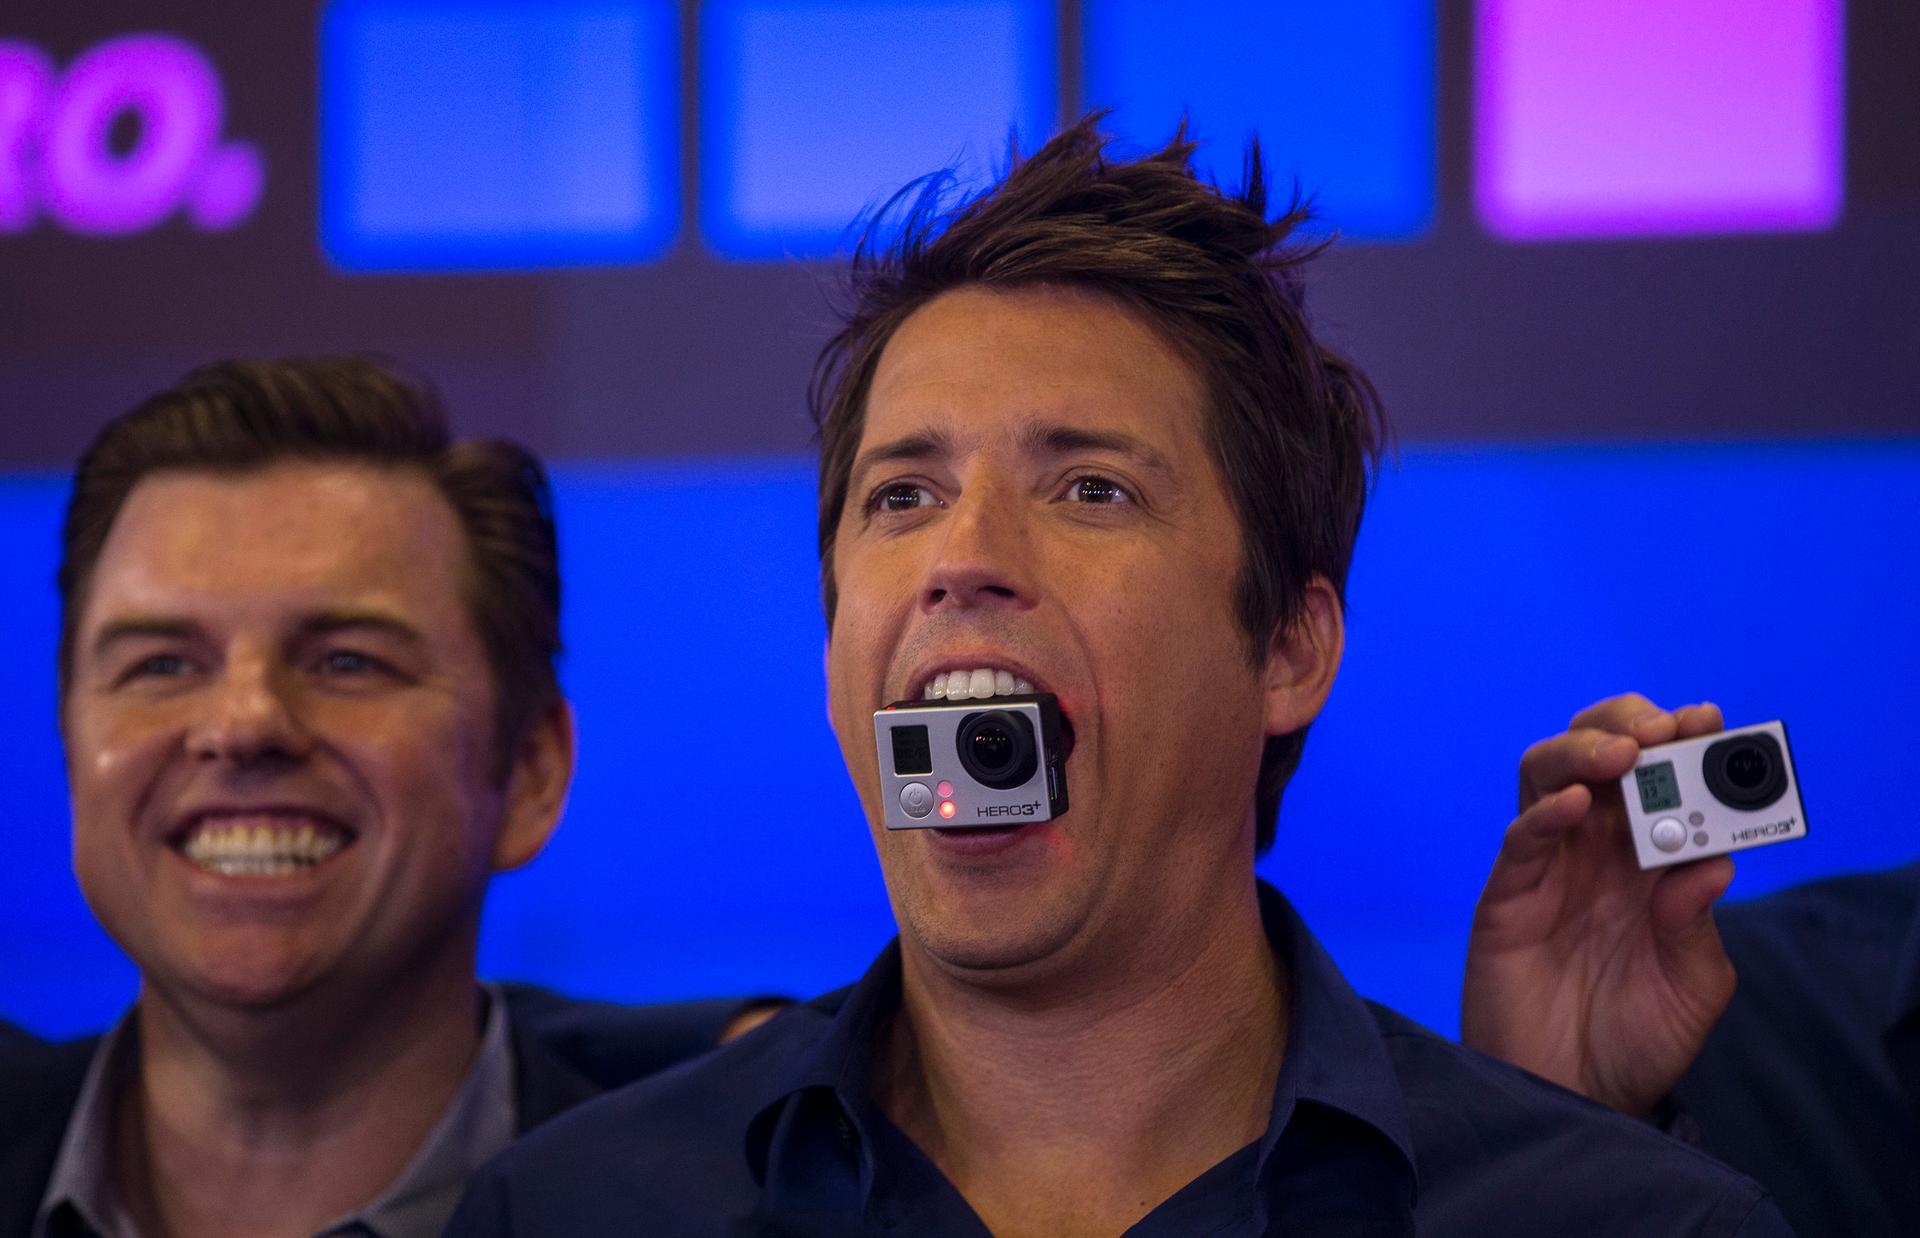 GoPro founder and CEO Nick Woodman holds a GoPro camera in his mouth as he celebrates the company's IPO at the Nasdaq Market Site in New York on June 26, 2014. 